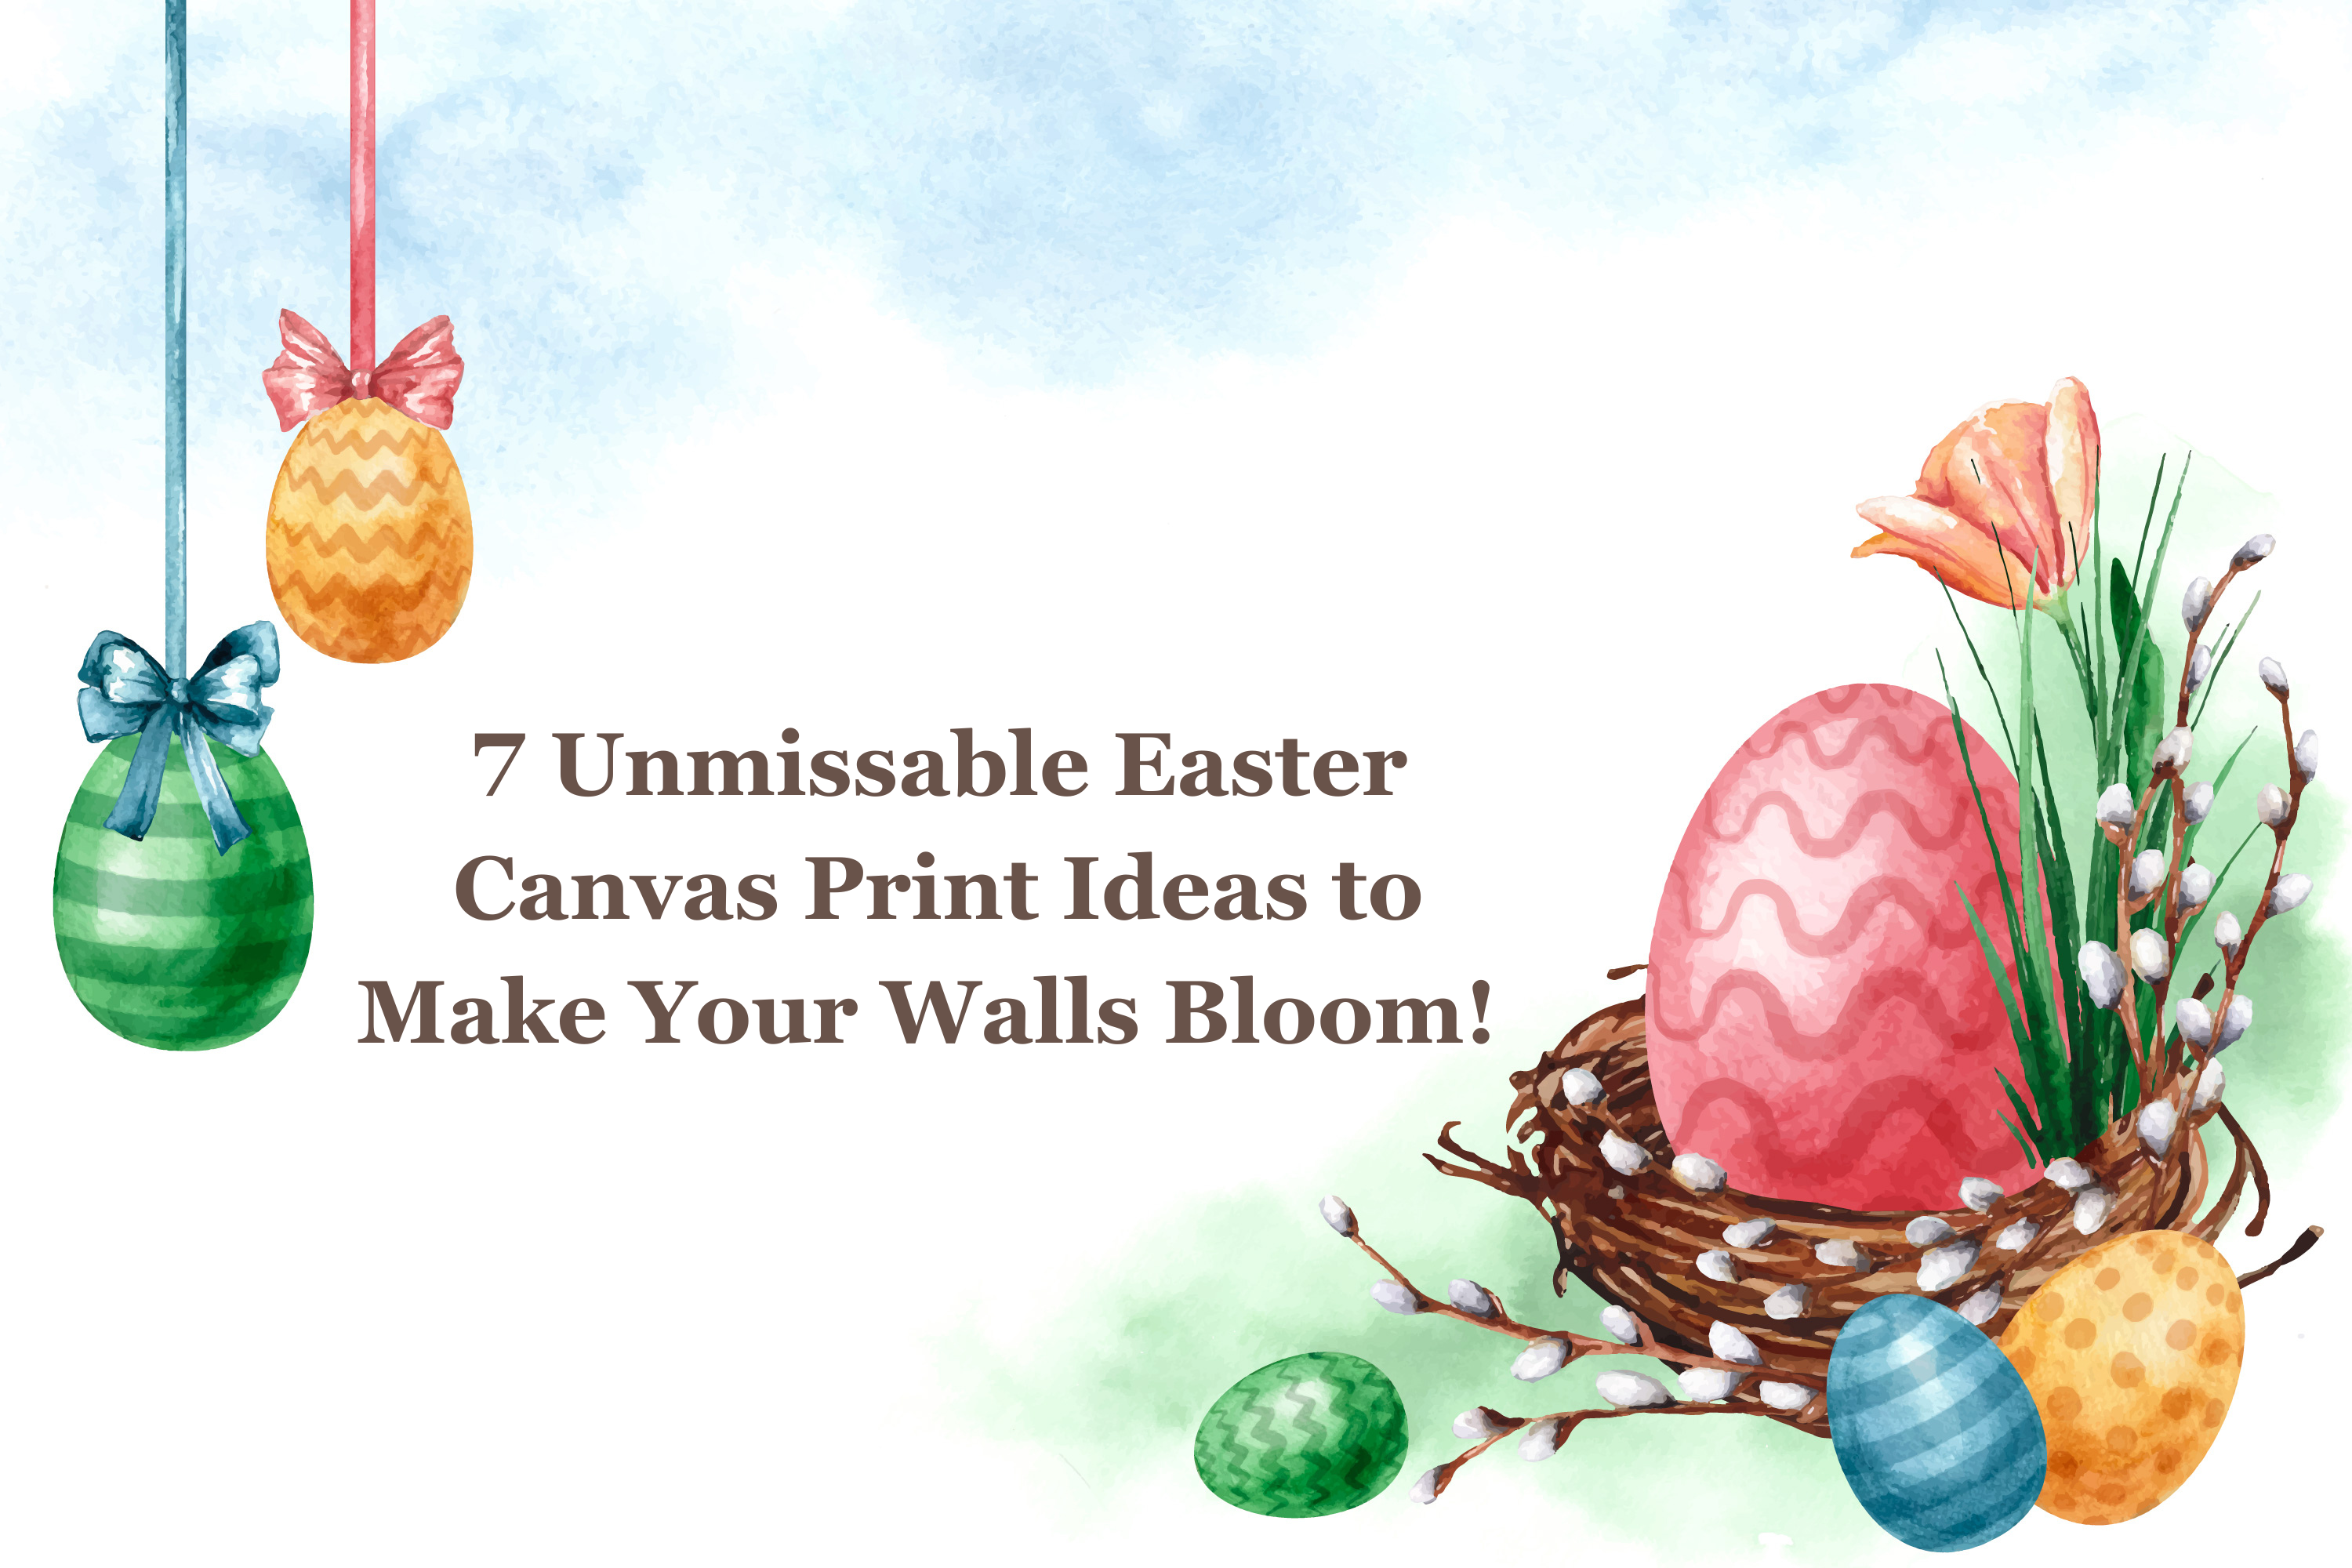 7 Unmissable Easter Canvas Print Ideas to Make Your Walls Bloom! 